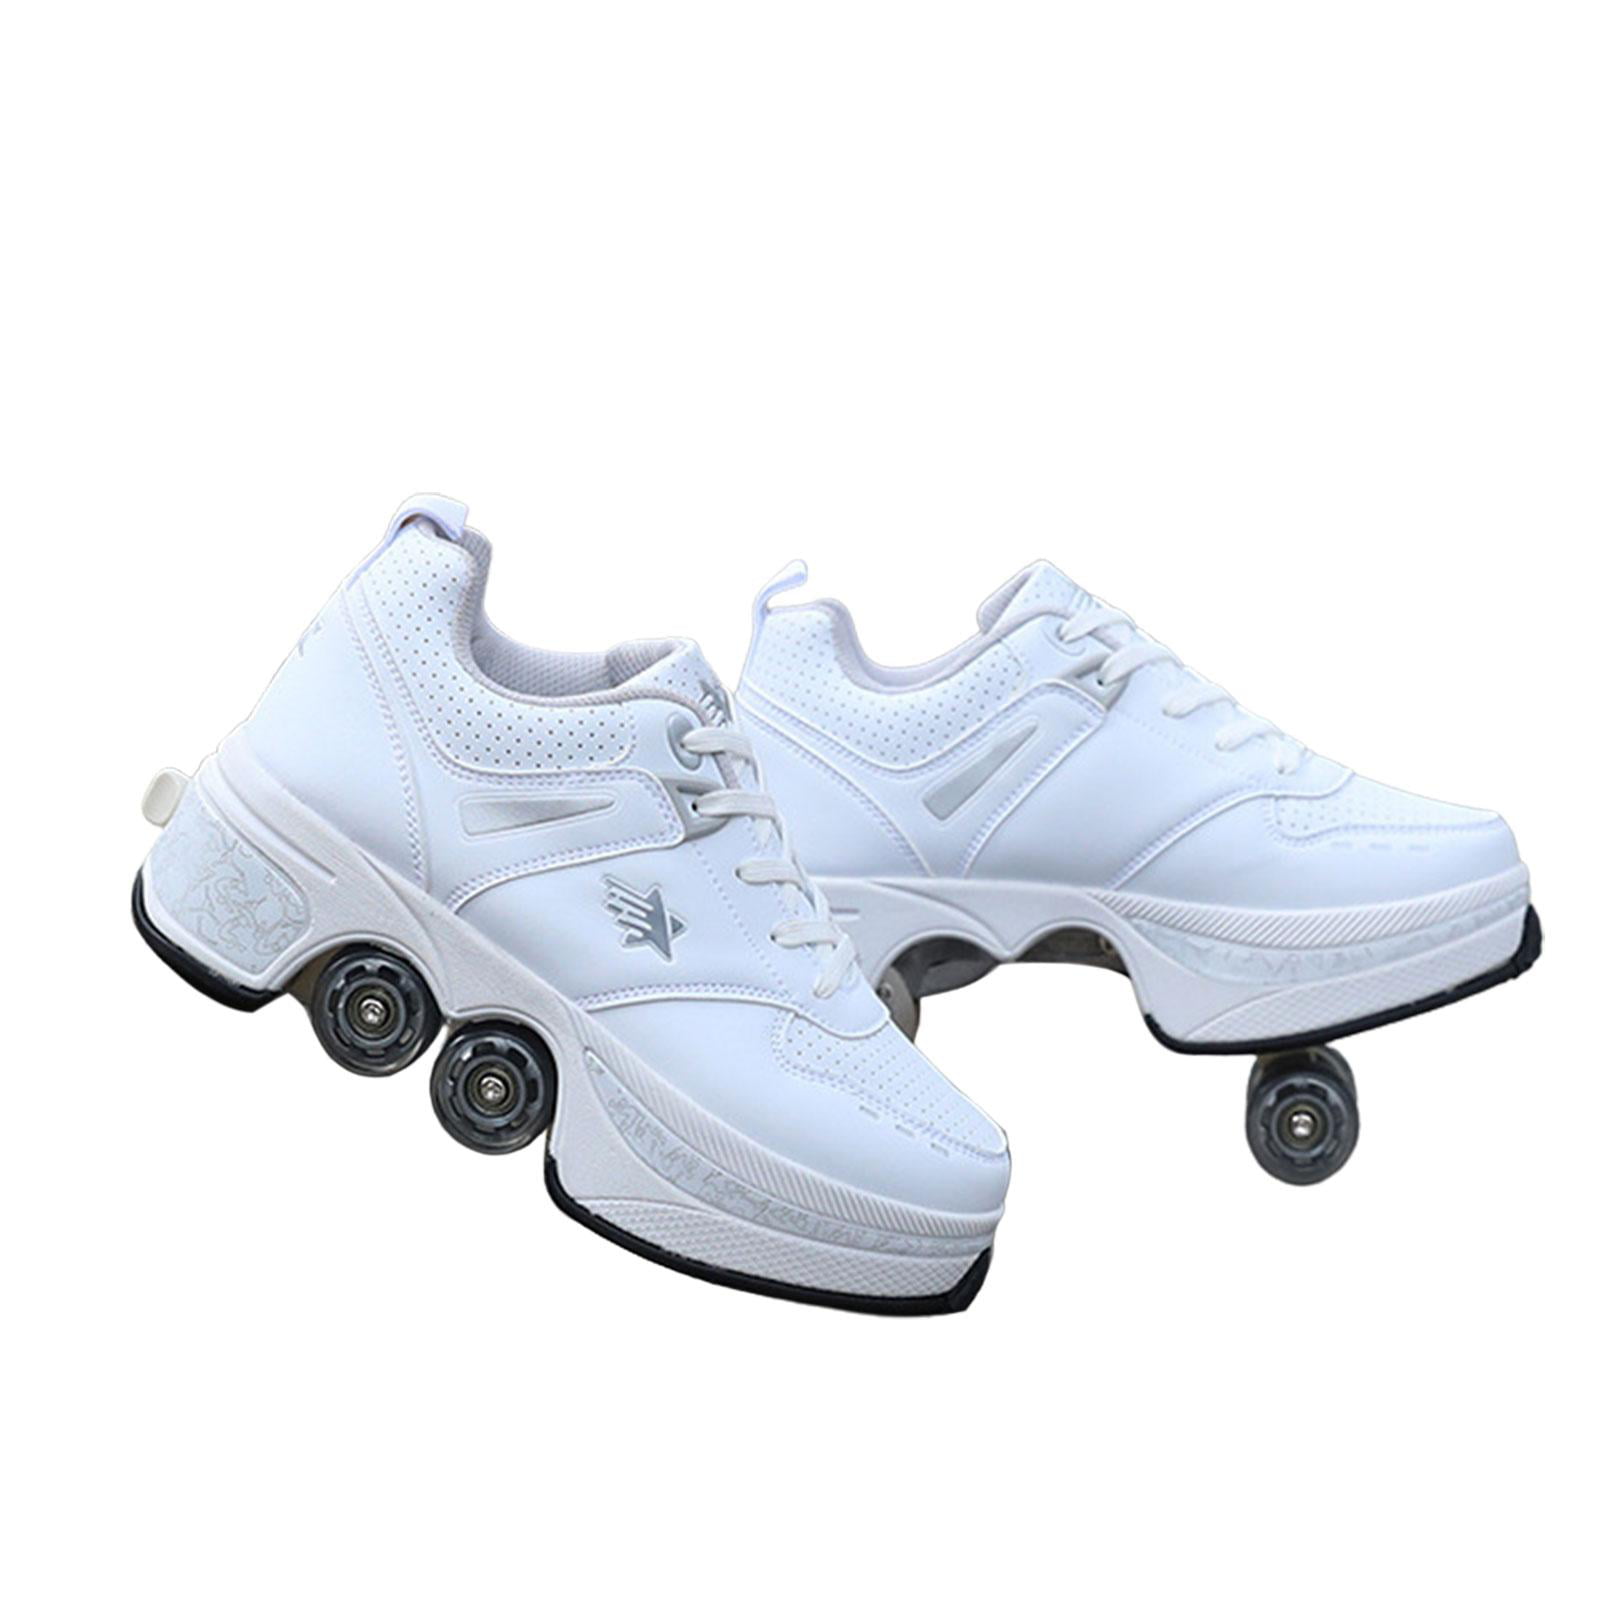 Younar Deformation Roller Shoes - Double-Row Deform Skating | Multifunctional Deformed Roller Skates with Wheels Parkour Shoes with Wheels for Girls Boys Walmart.com